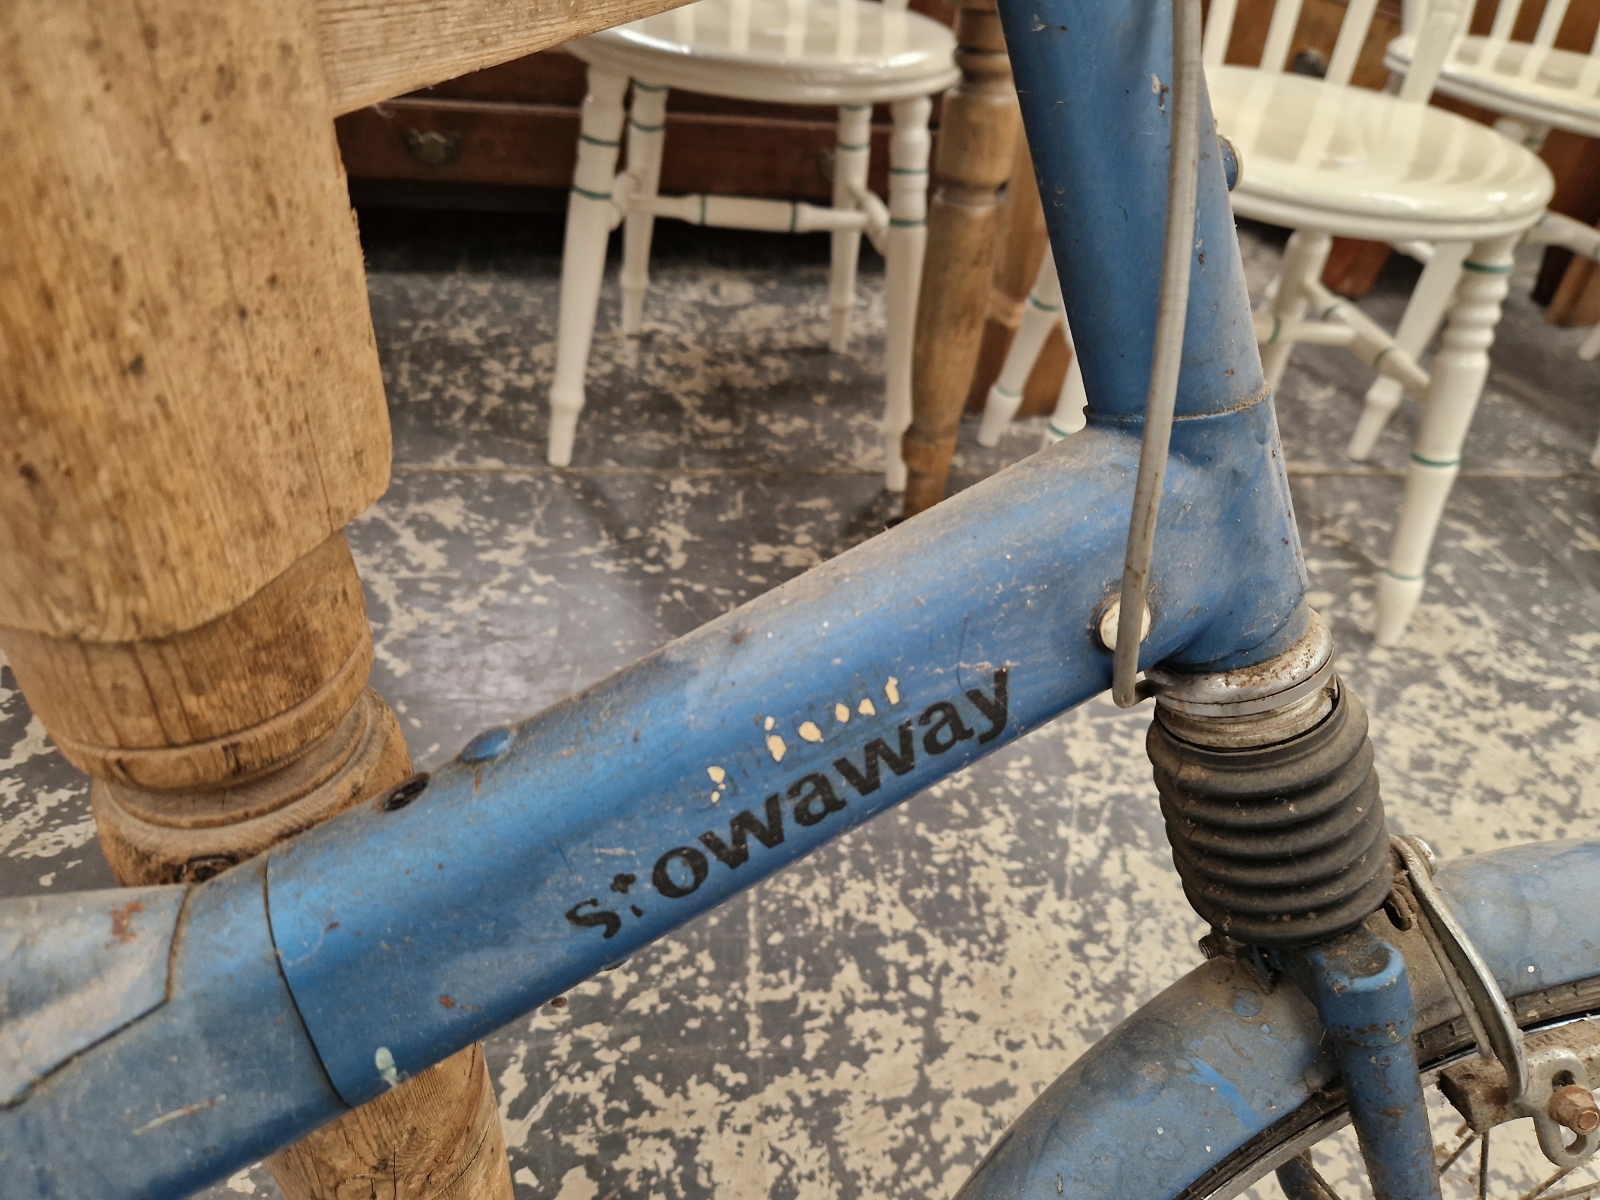 A MOULTON BLUE STOWAWAY BICYCLE - Image 2 of 6